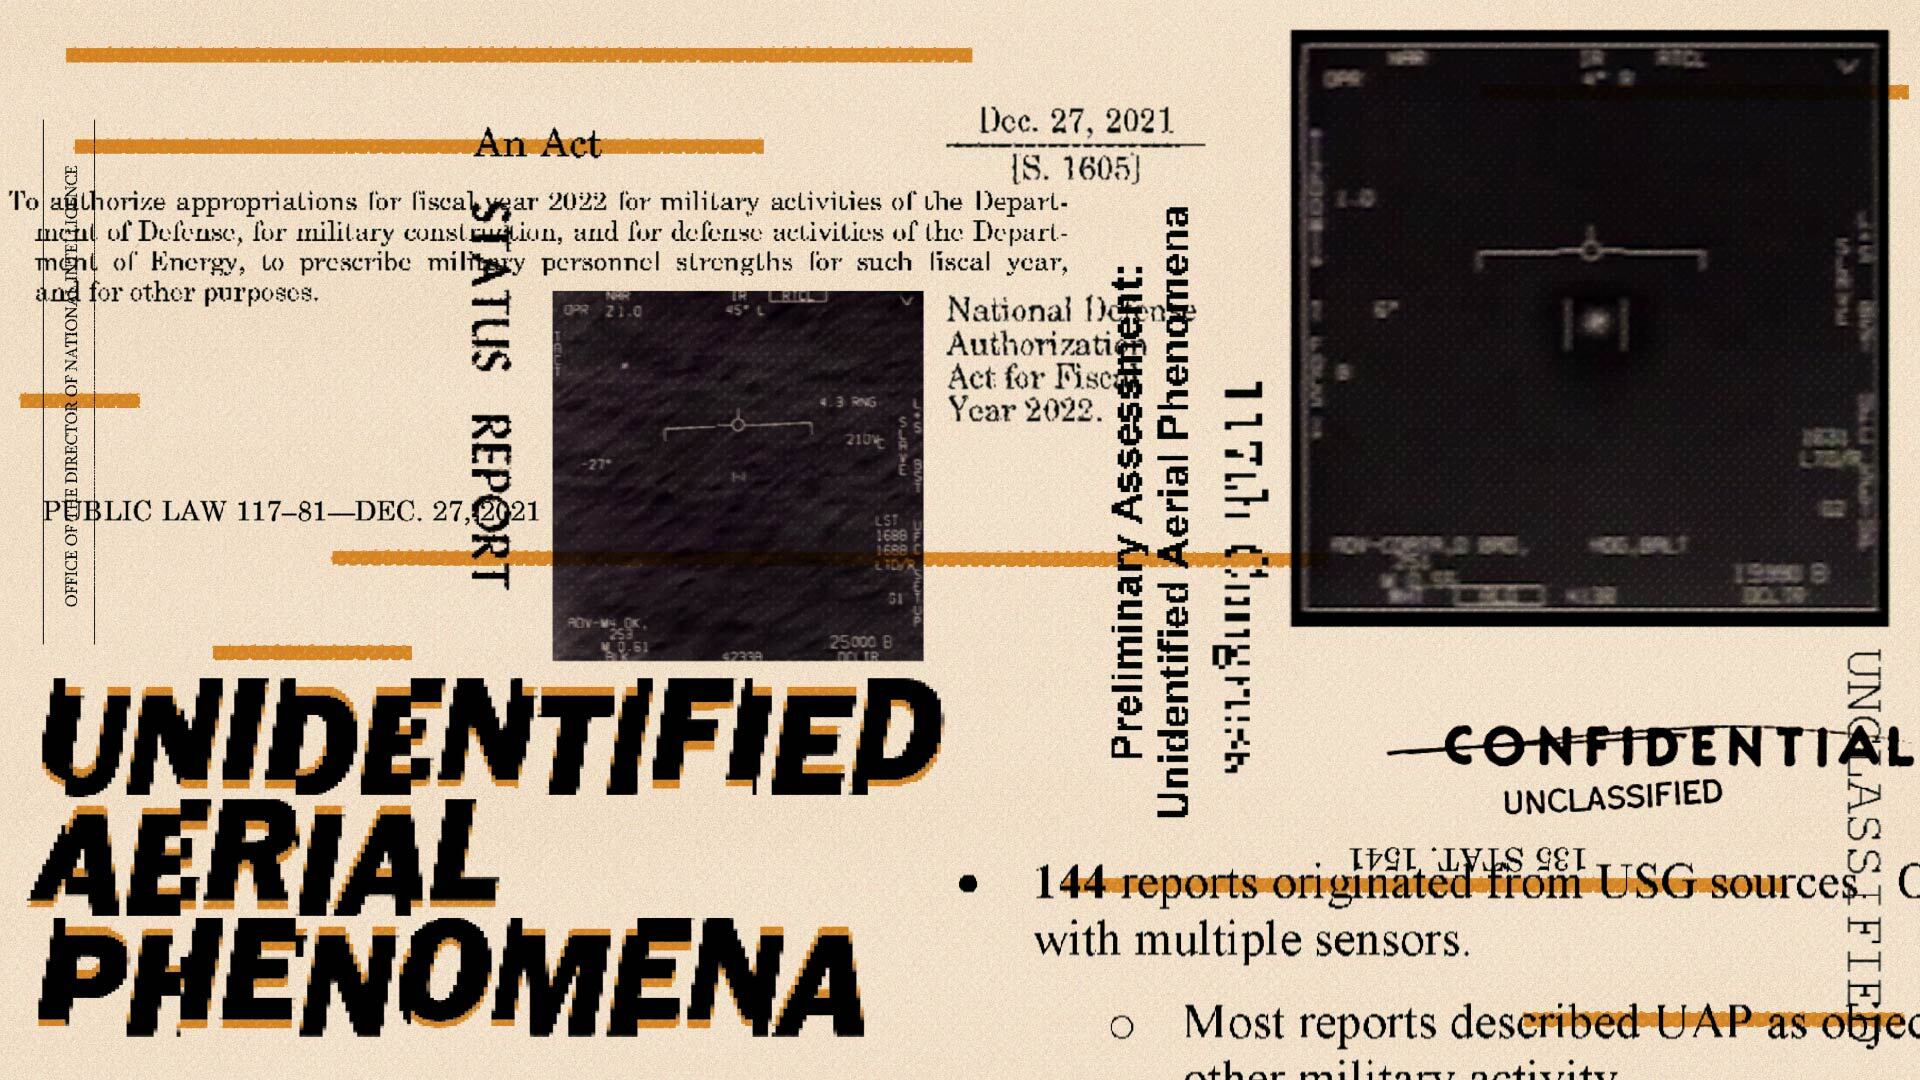 What is the name of the alleged extraterrestrial spacecraft that crashed in Roswell?